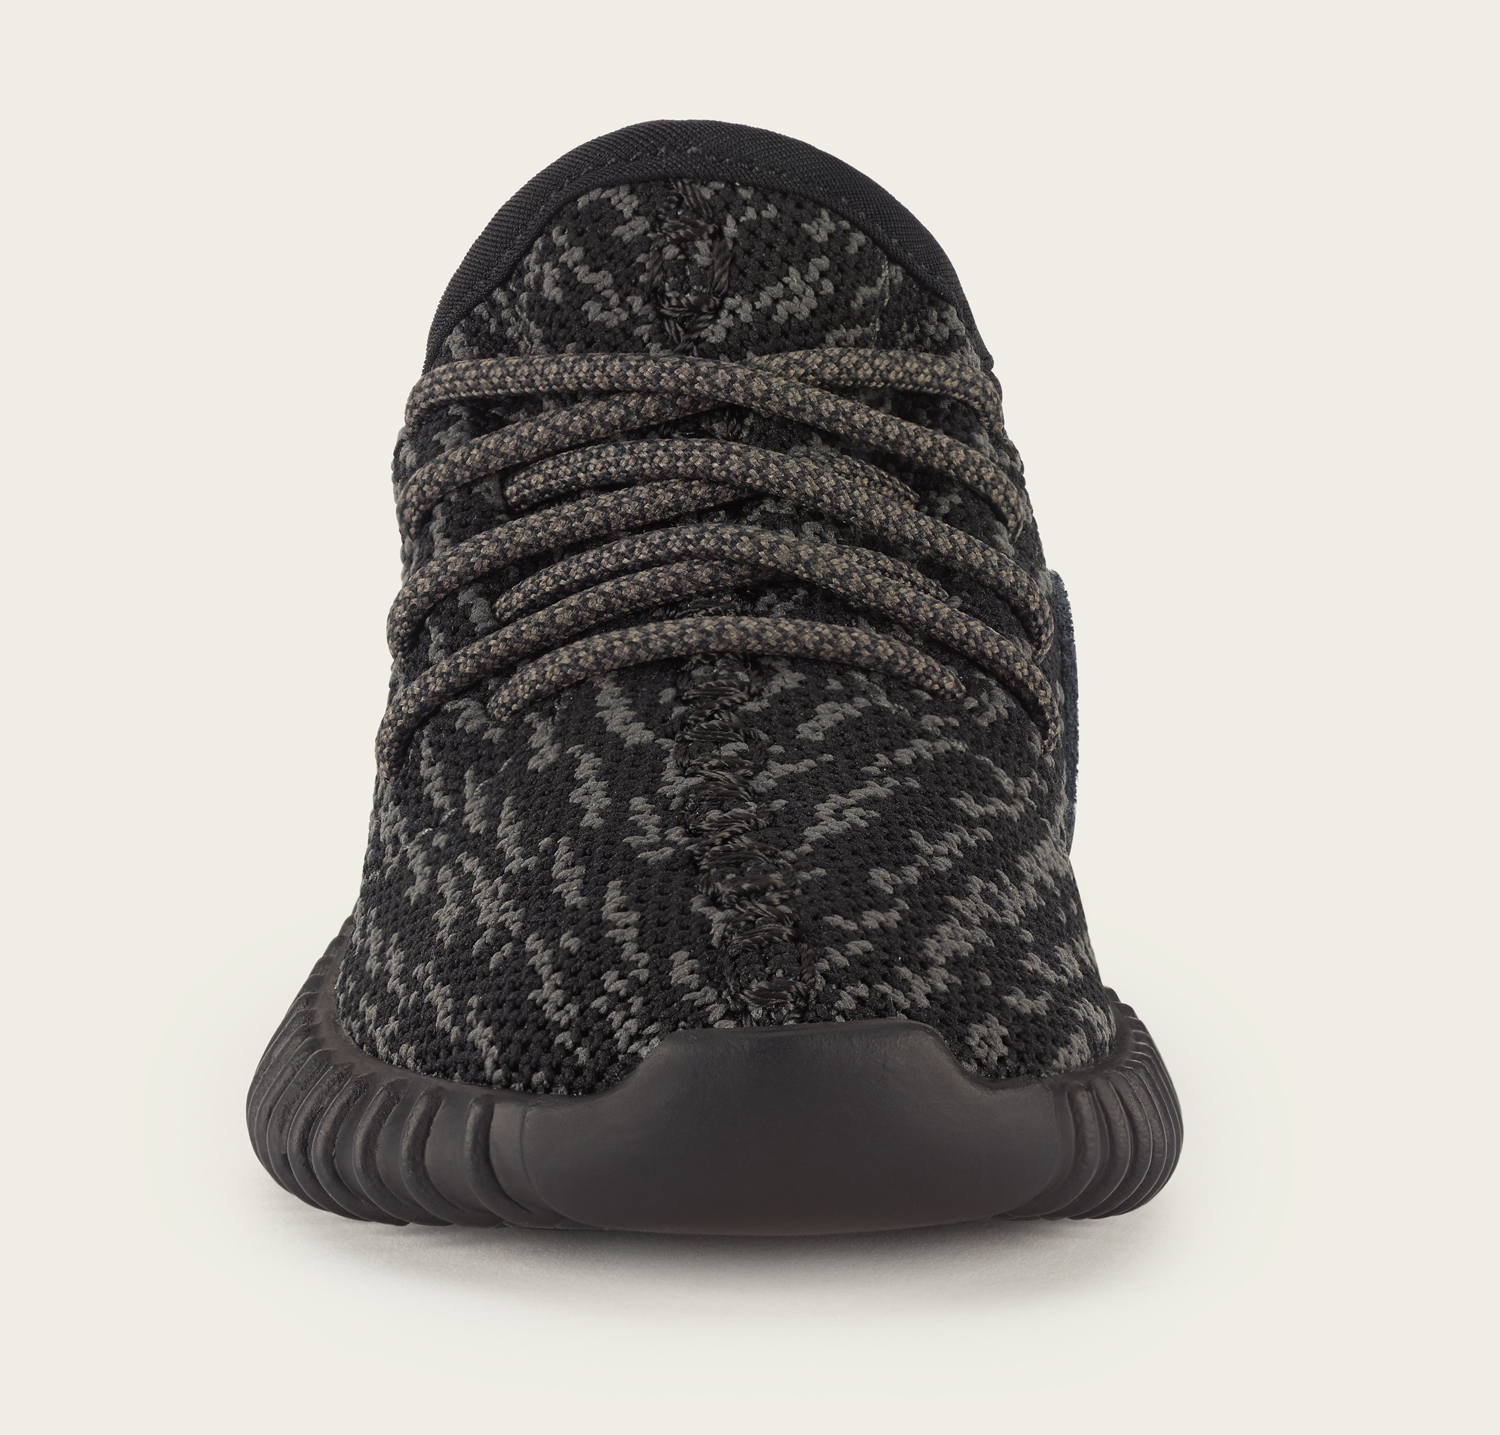 Infant Yeezy Boost Pirate Black Front